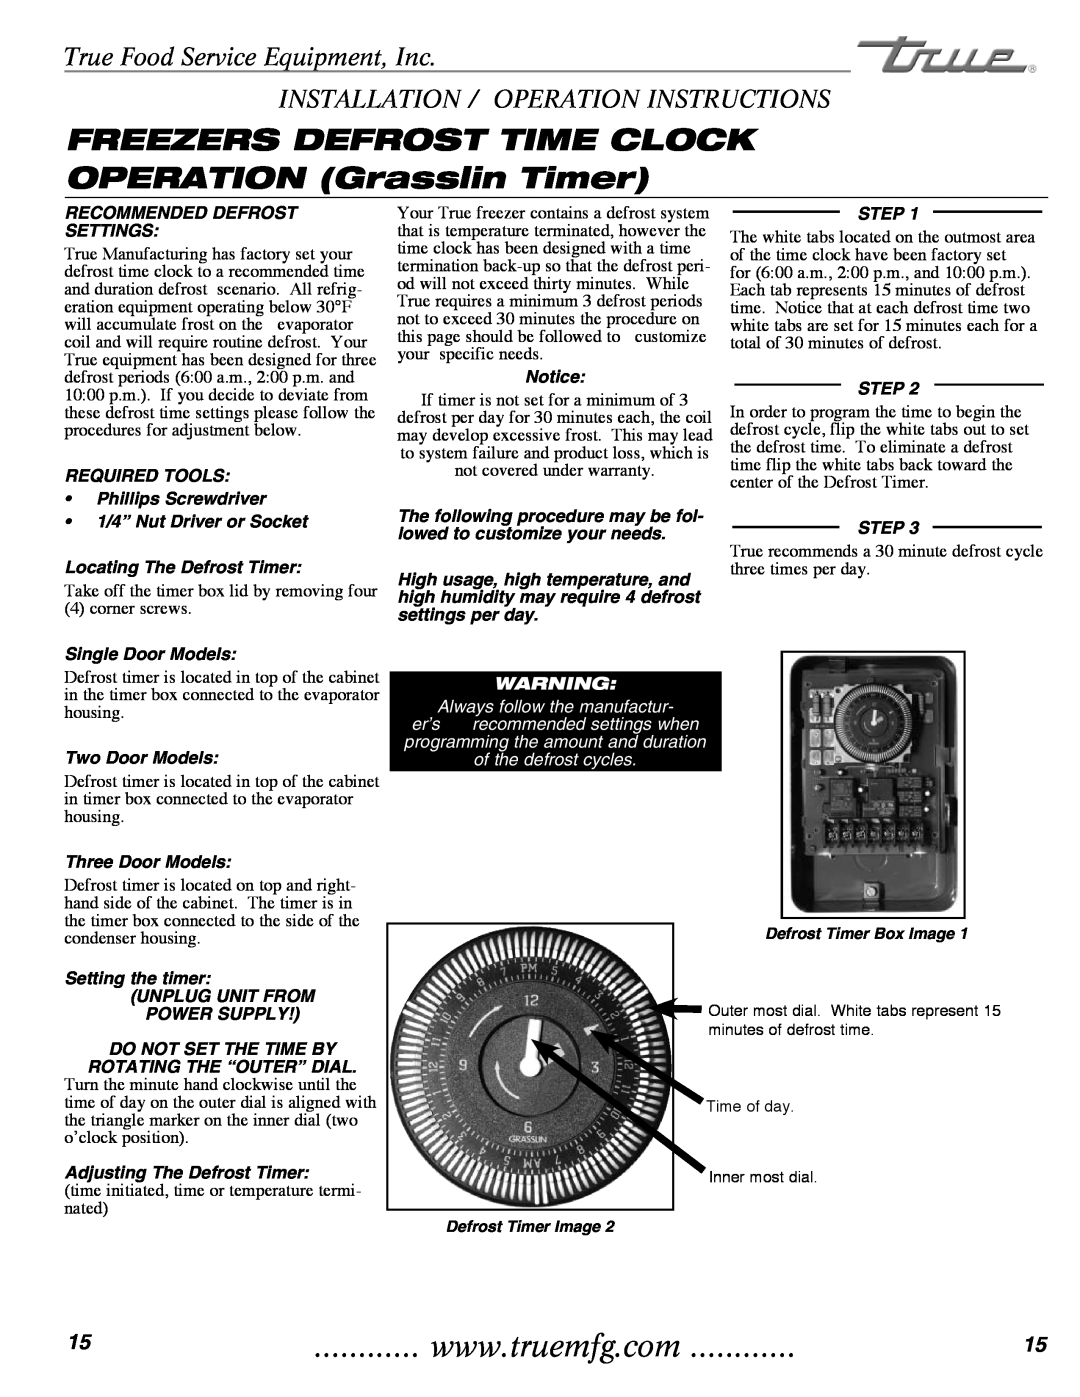 True Manufacturing Company TR2RRT-2S-2S FREEZERS DEFROST TIME CLOCK OPERATION Grasslin Timer, of the defrost cycles 